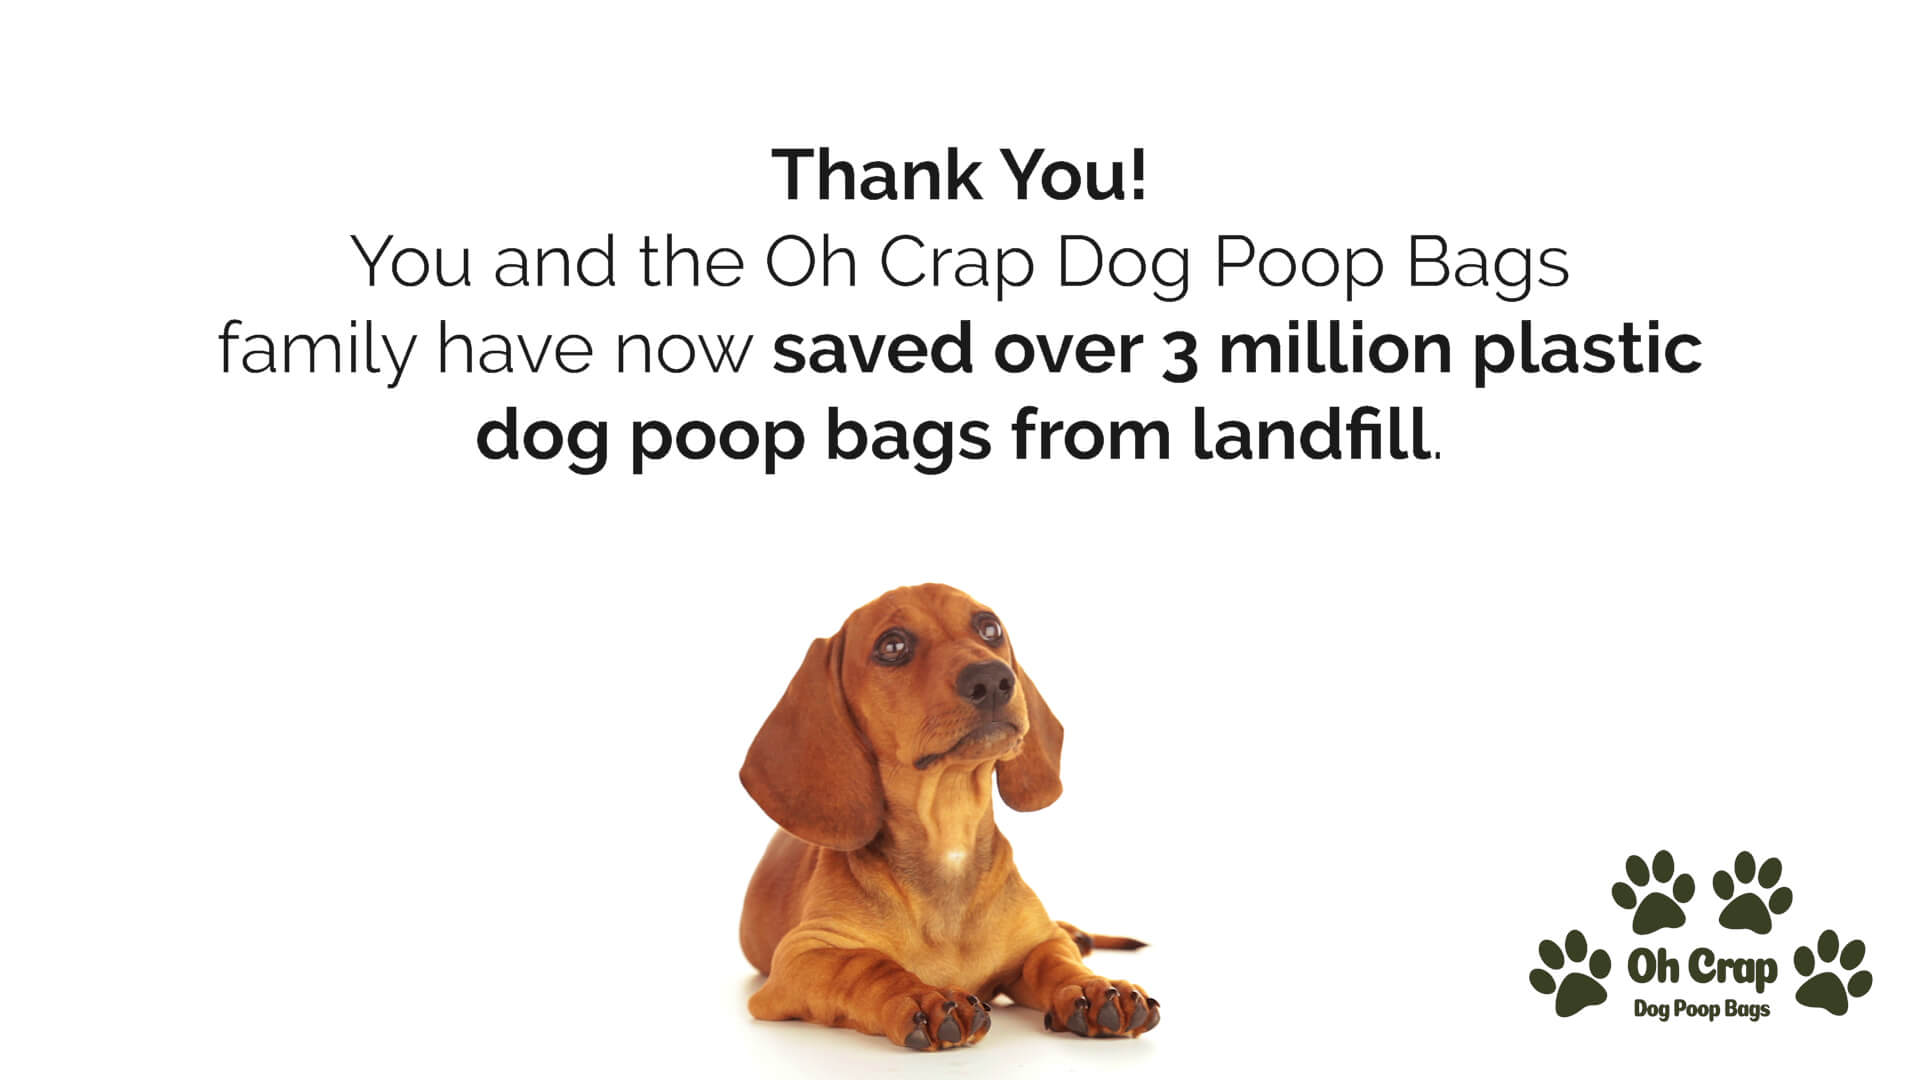 3 Million Dog Poop Bags Saved From Landfill by The #OhCrapFamily